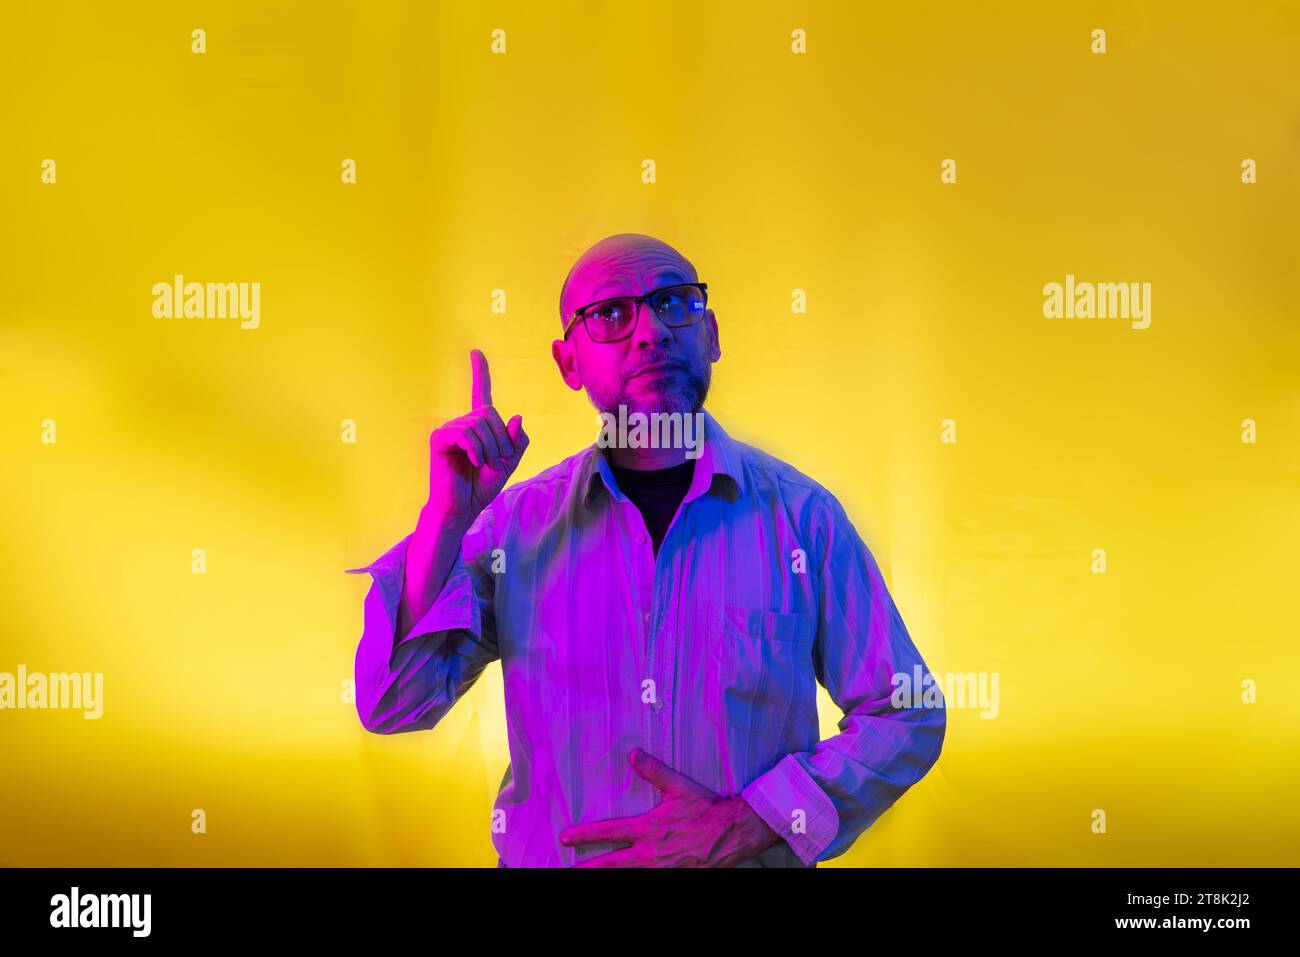 Bald, bearded man wearing glasses pointing up. Isolated on yellow background. Stock Photo